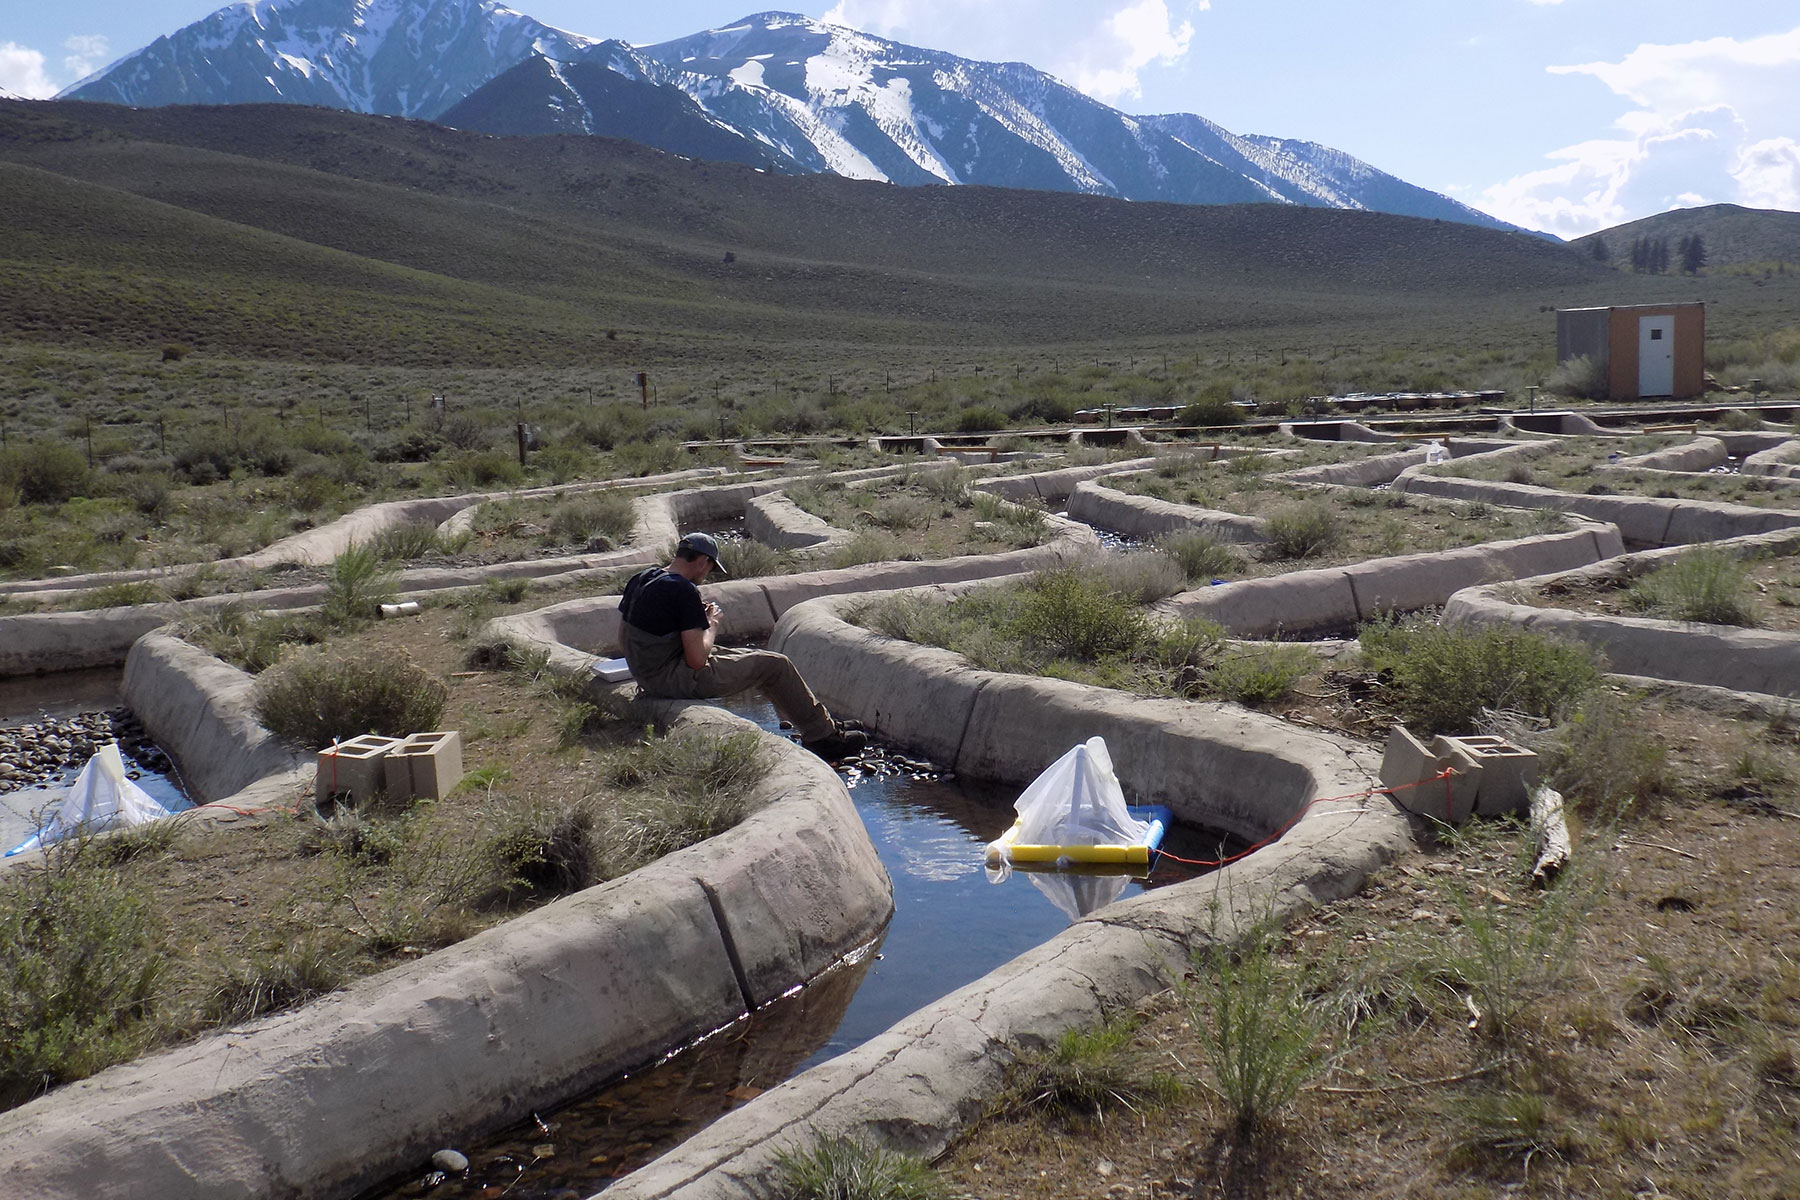 Water flows through a series of concrete channels that zig-zag across a dry, grassy mountainside. In the foreground, a person sits on the edge of one of the channels watching a white contraption that is floating in the water. Snowy mountain peaks rise in the background.